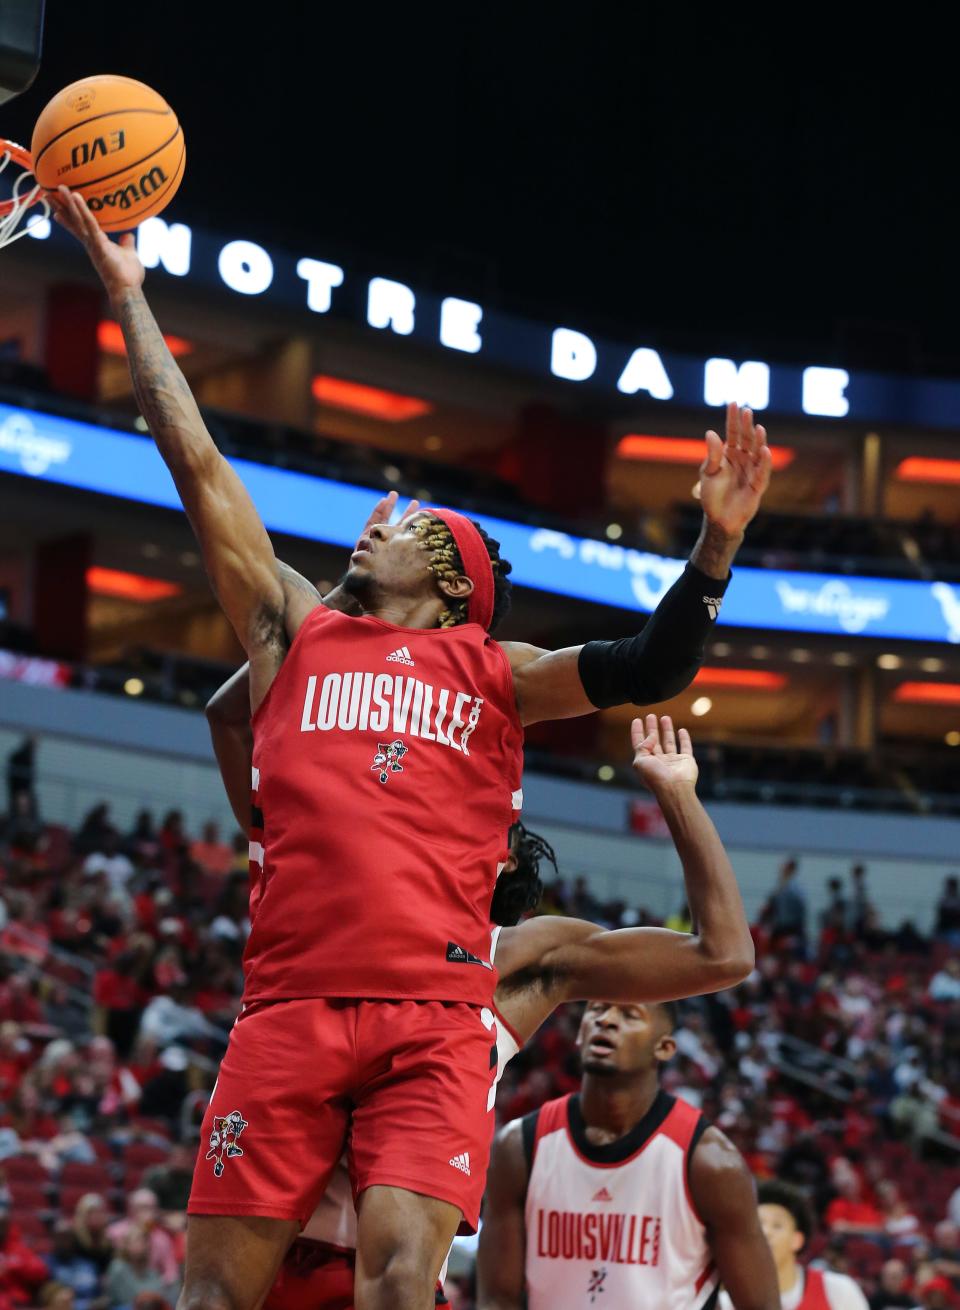 U of L’s El Ellis (3) scored against the defense during their red/white scrimmage at the Yum Center in Louisville, Ky. on Oct. 23, 2022.  